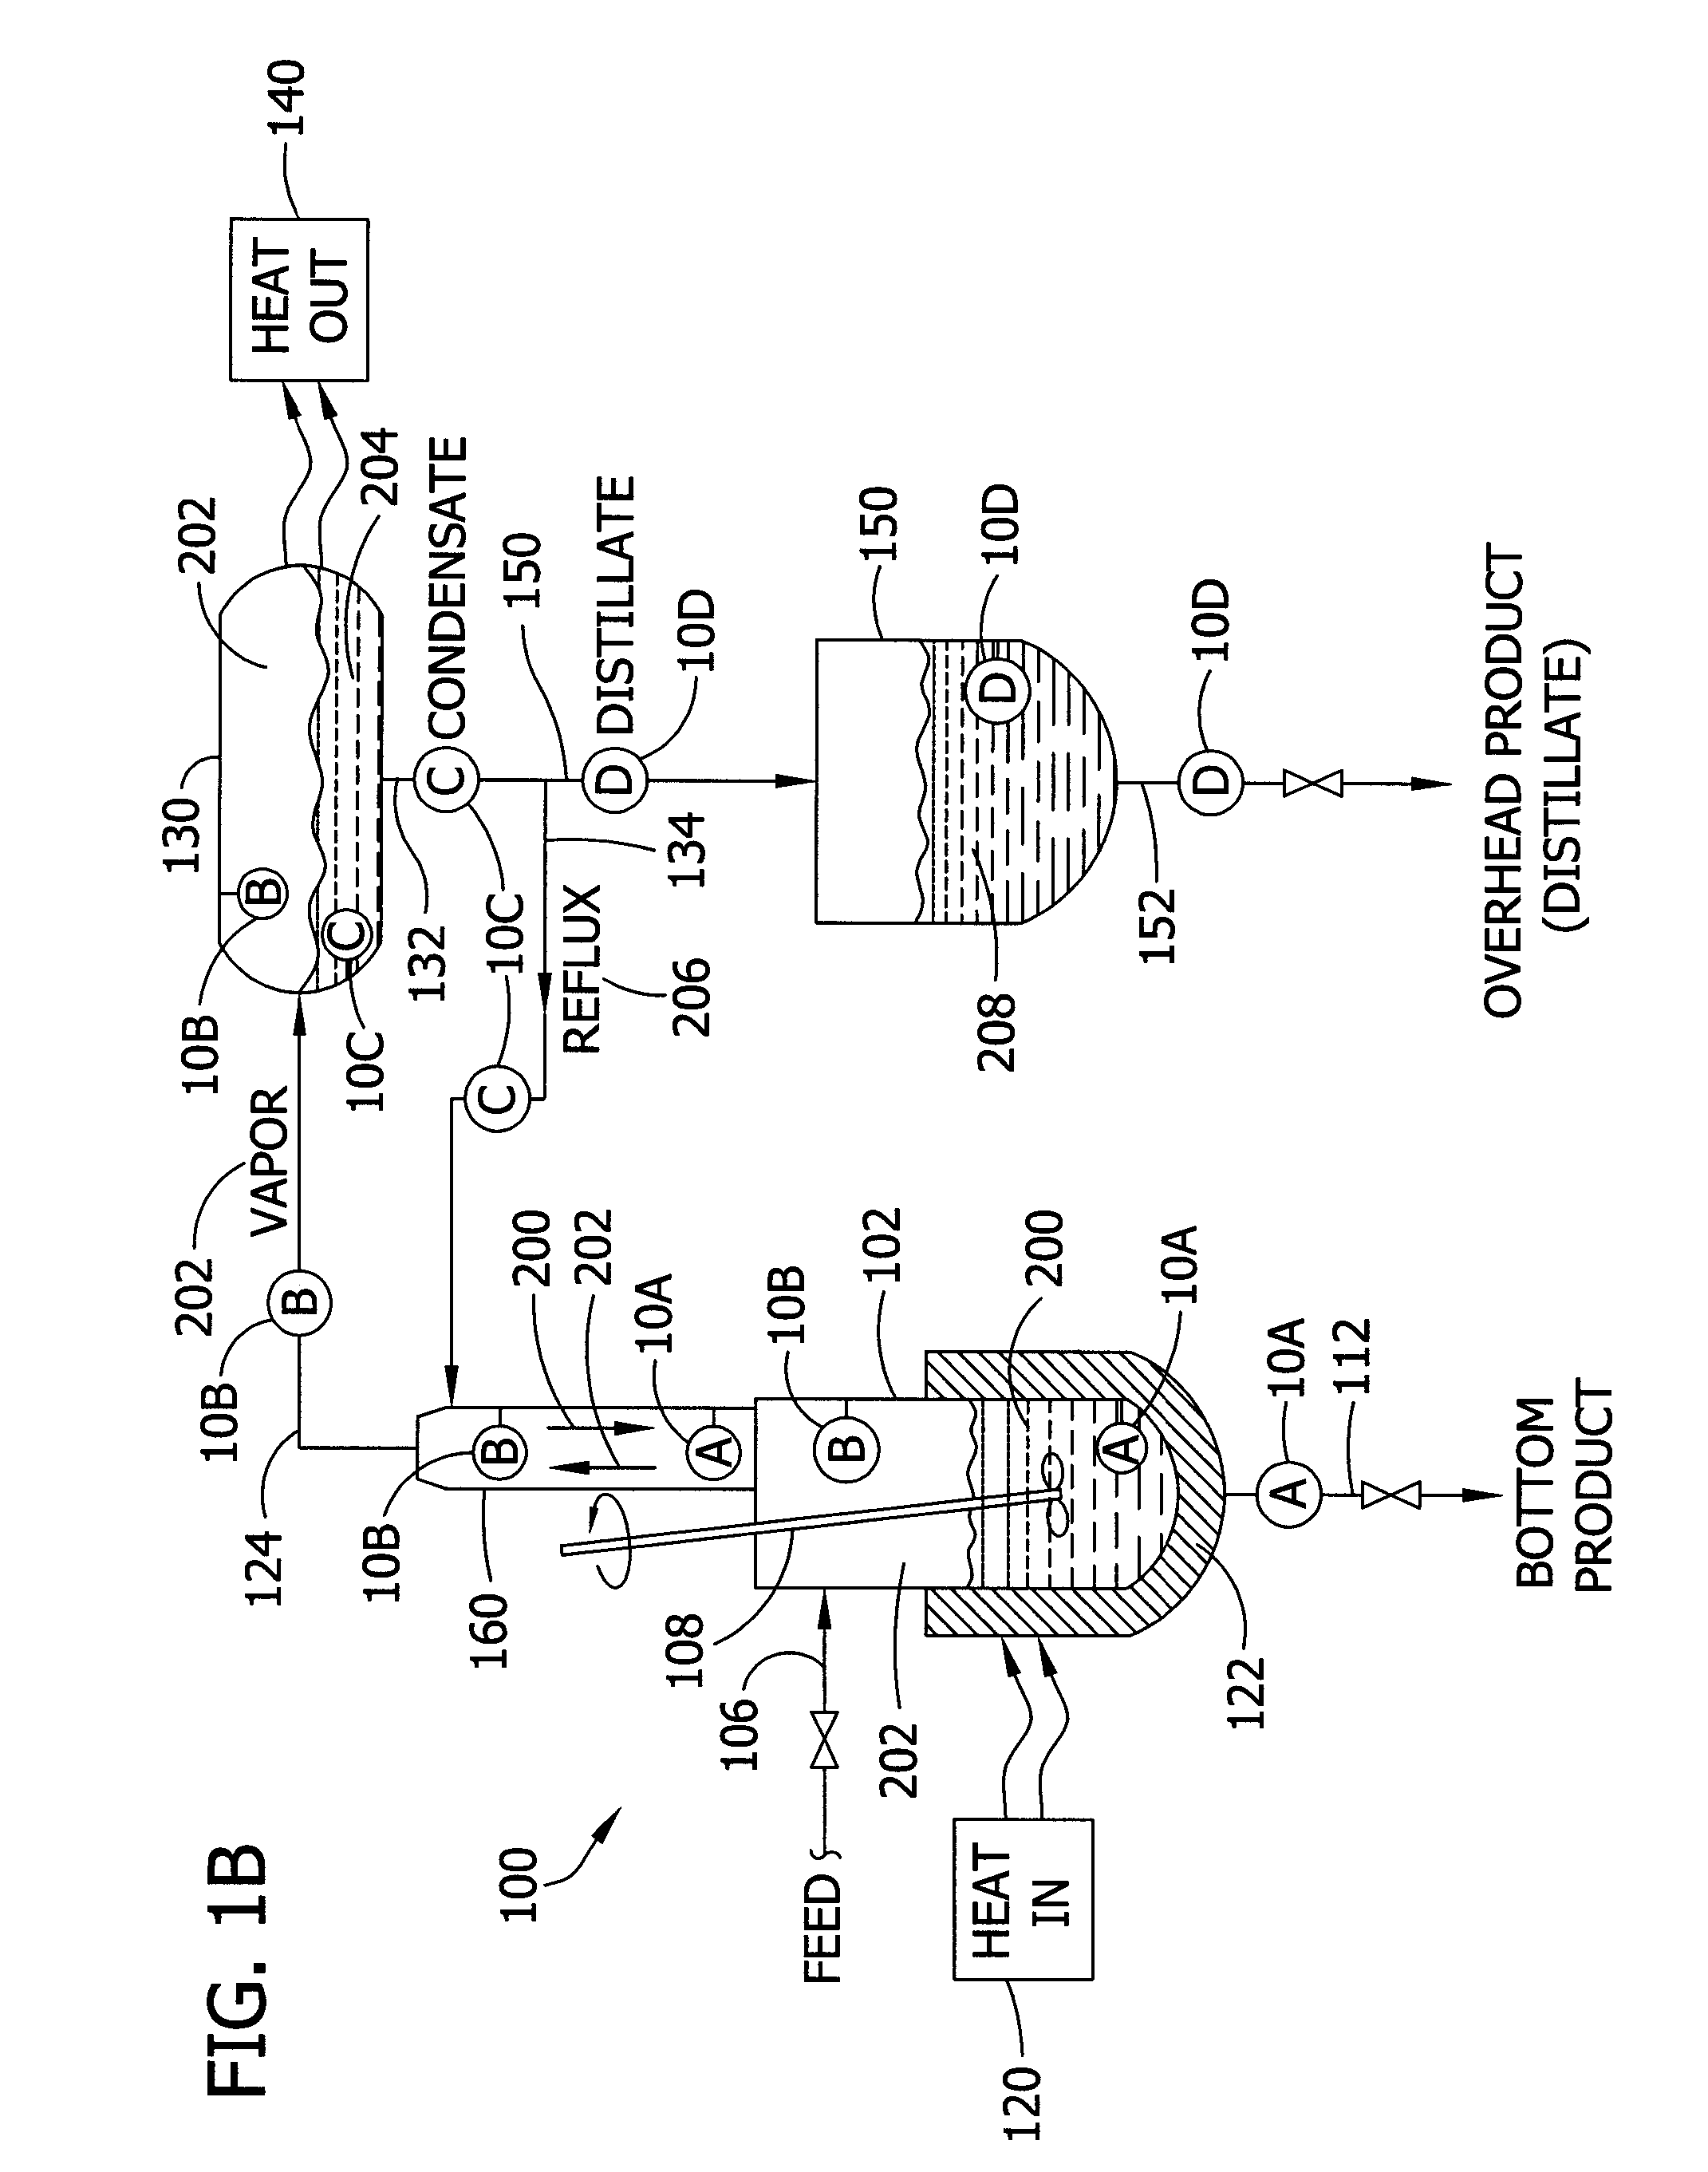 Systems for monitoring and controlling unit operations that include distillation